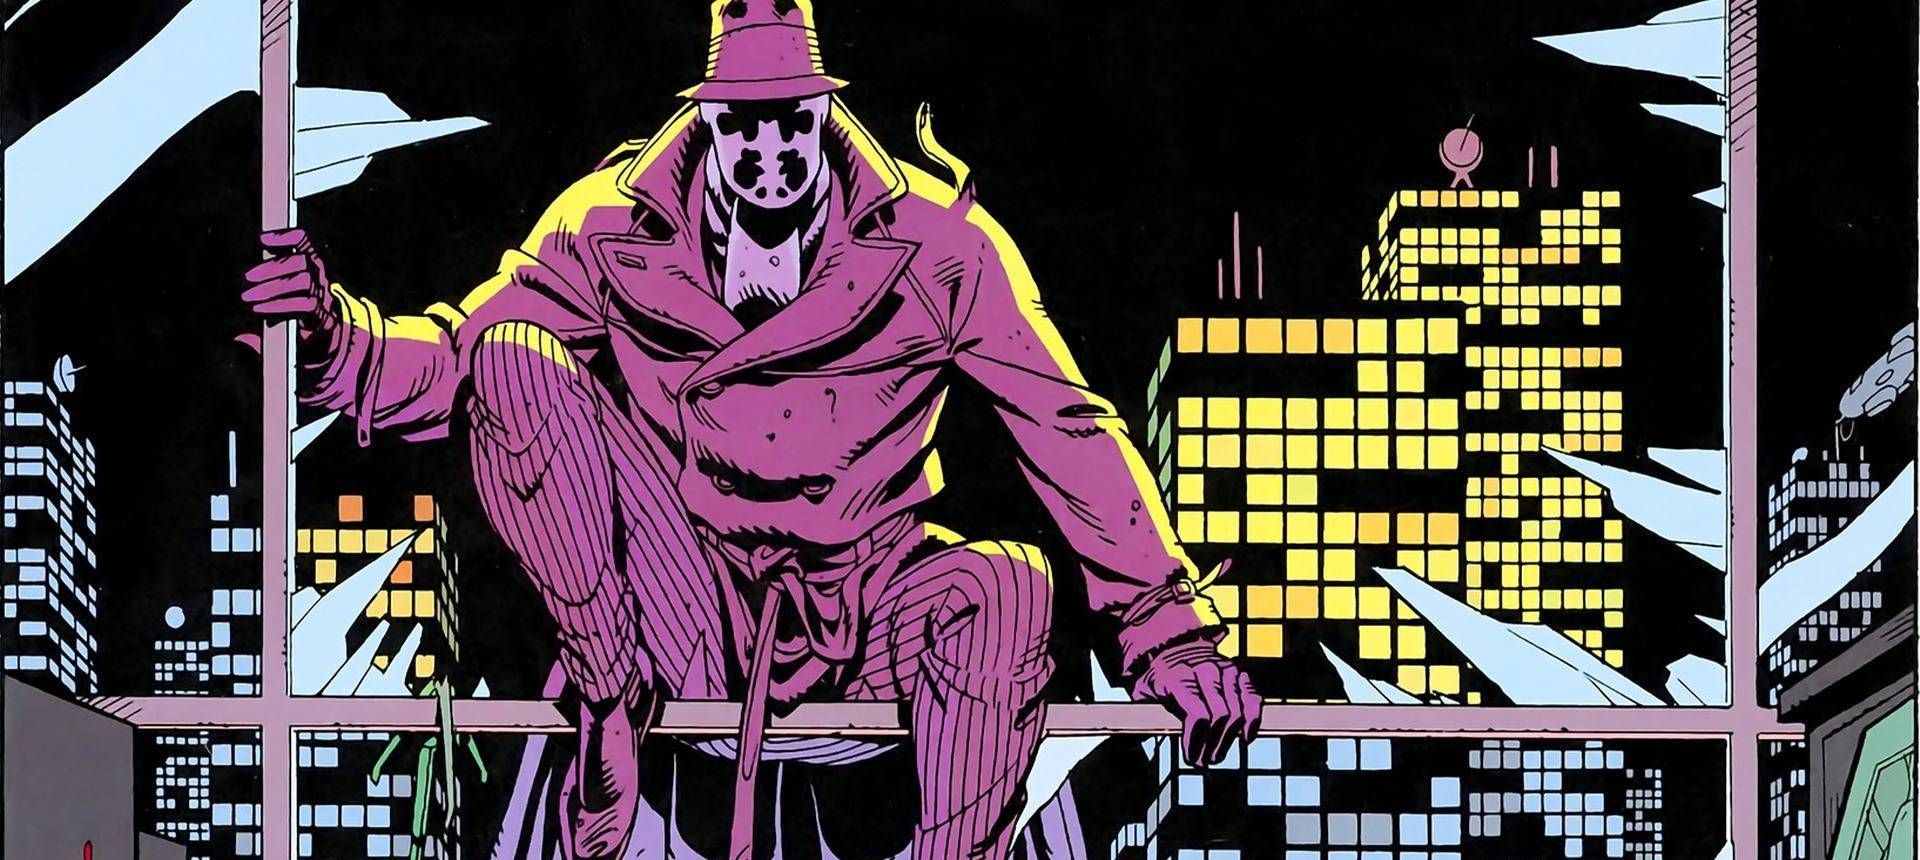 Rorschach, by Dave Gibbons